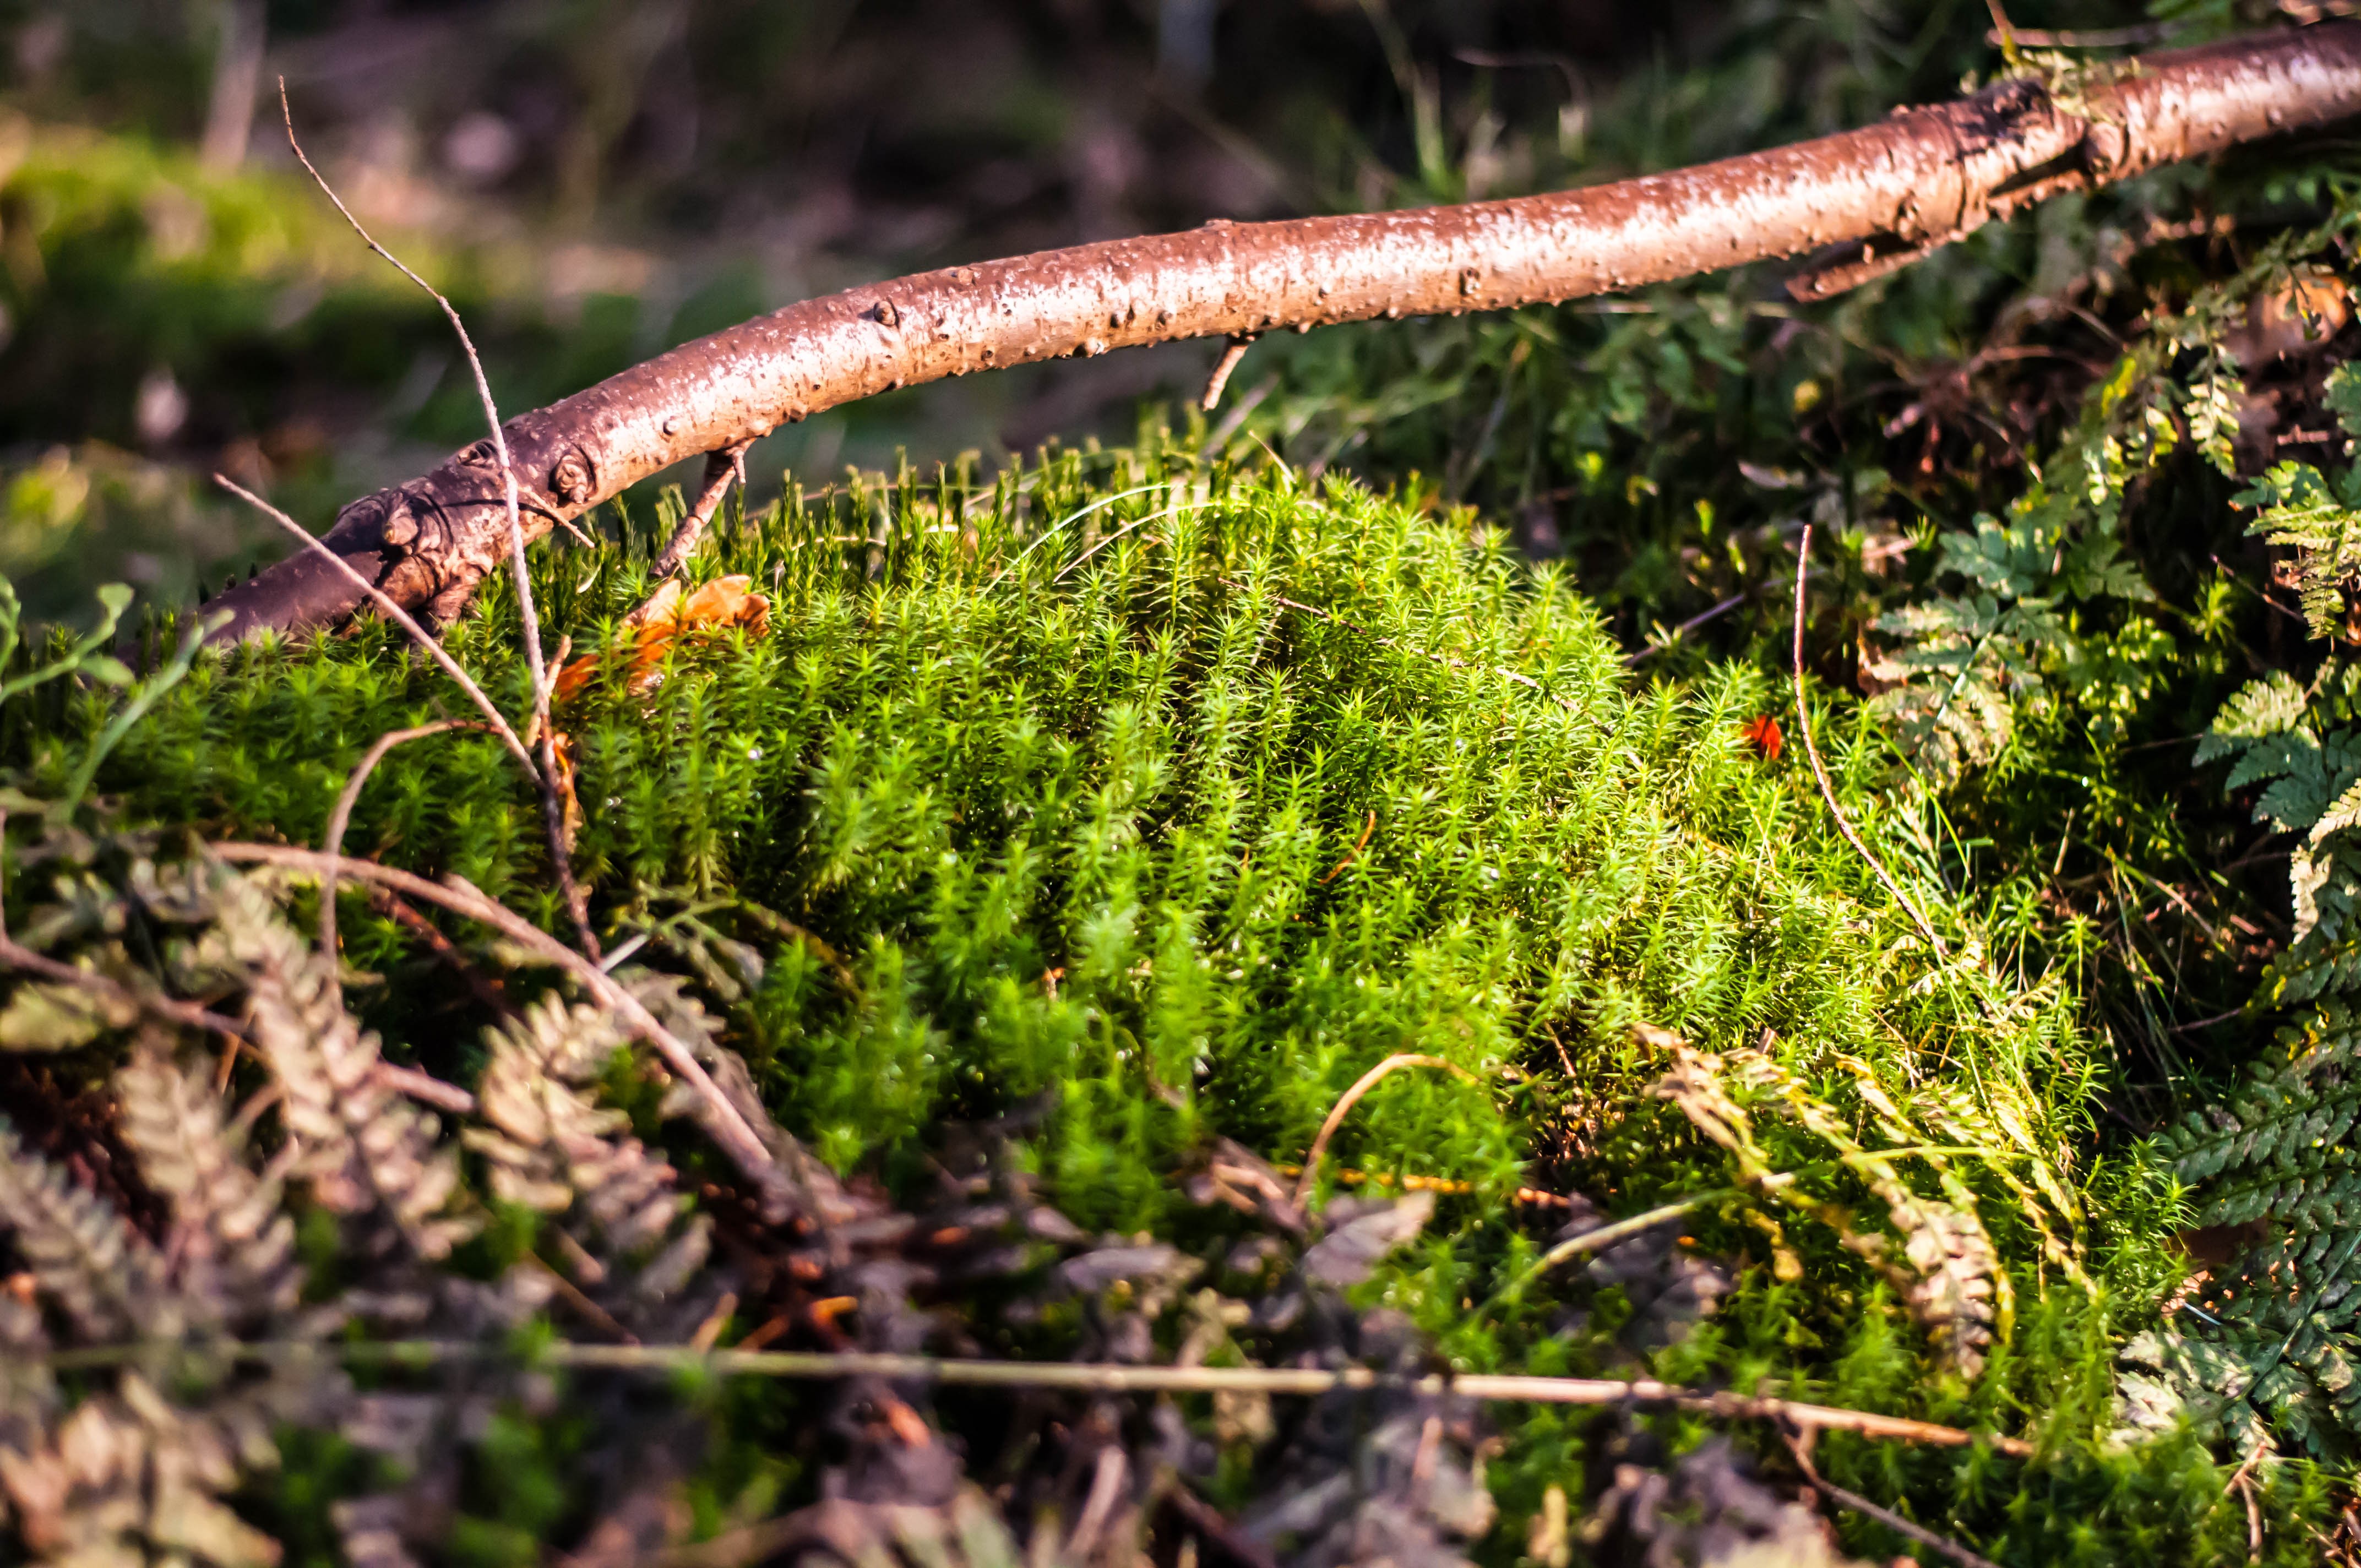 General 4288x2848 forest moss nature plants